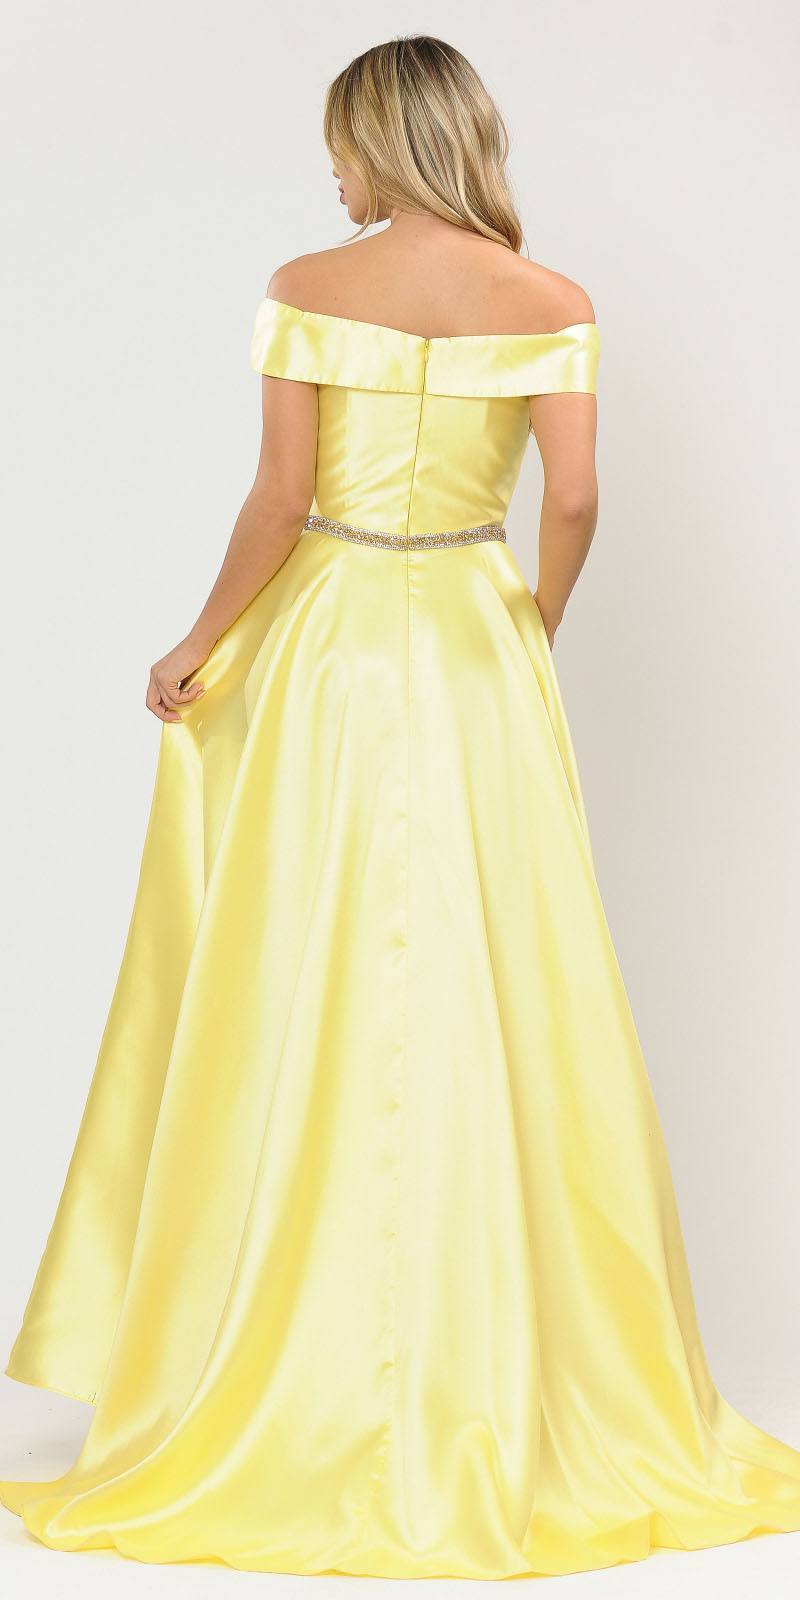 Poly USA 8680 Yellow Off-Shoulder A-Line Long Prom Dress with Pockets